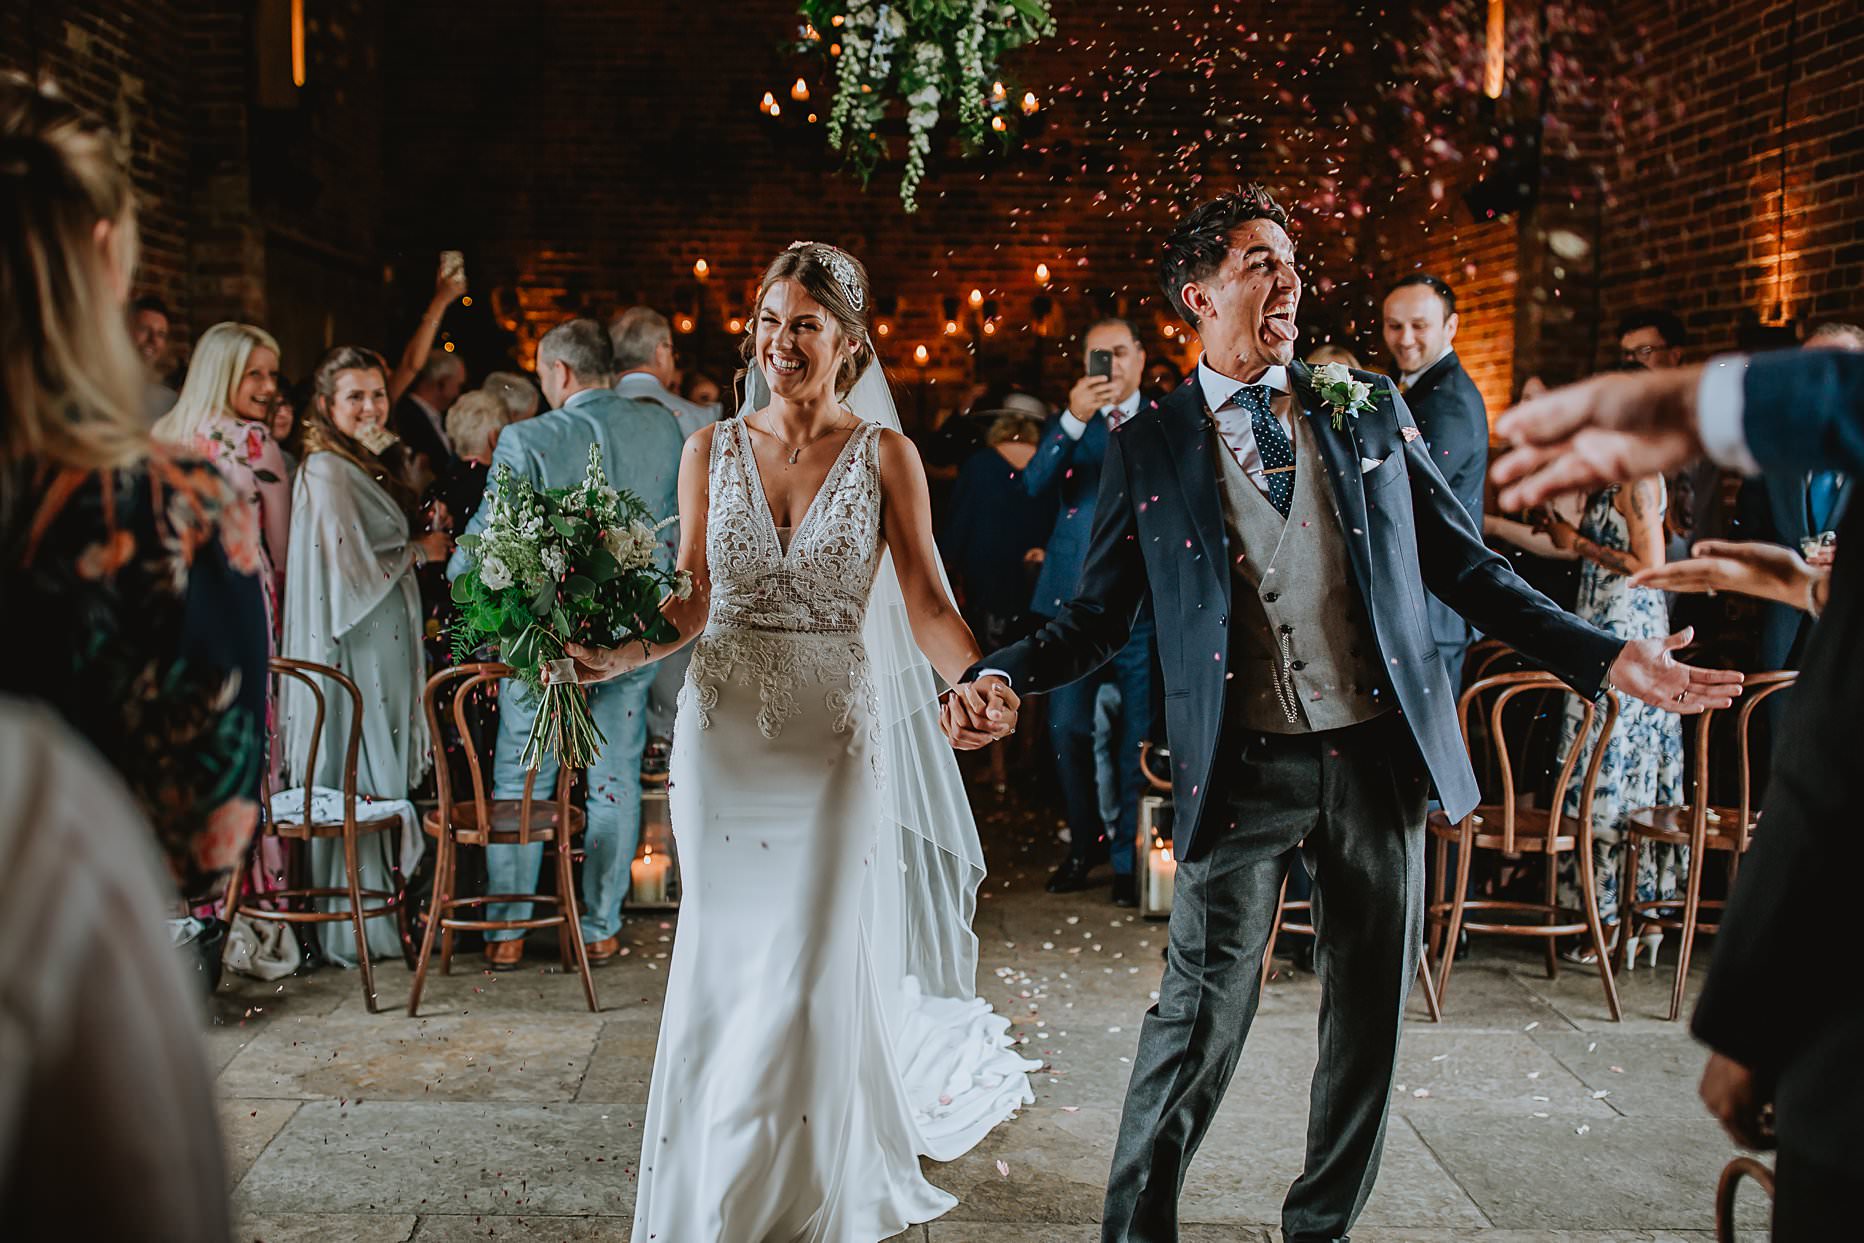 Bride and groom walking down the aisle whilst guests throw confetti at them. They are both smiling and groom is making a silly face.